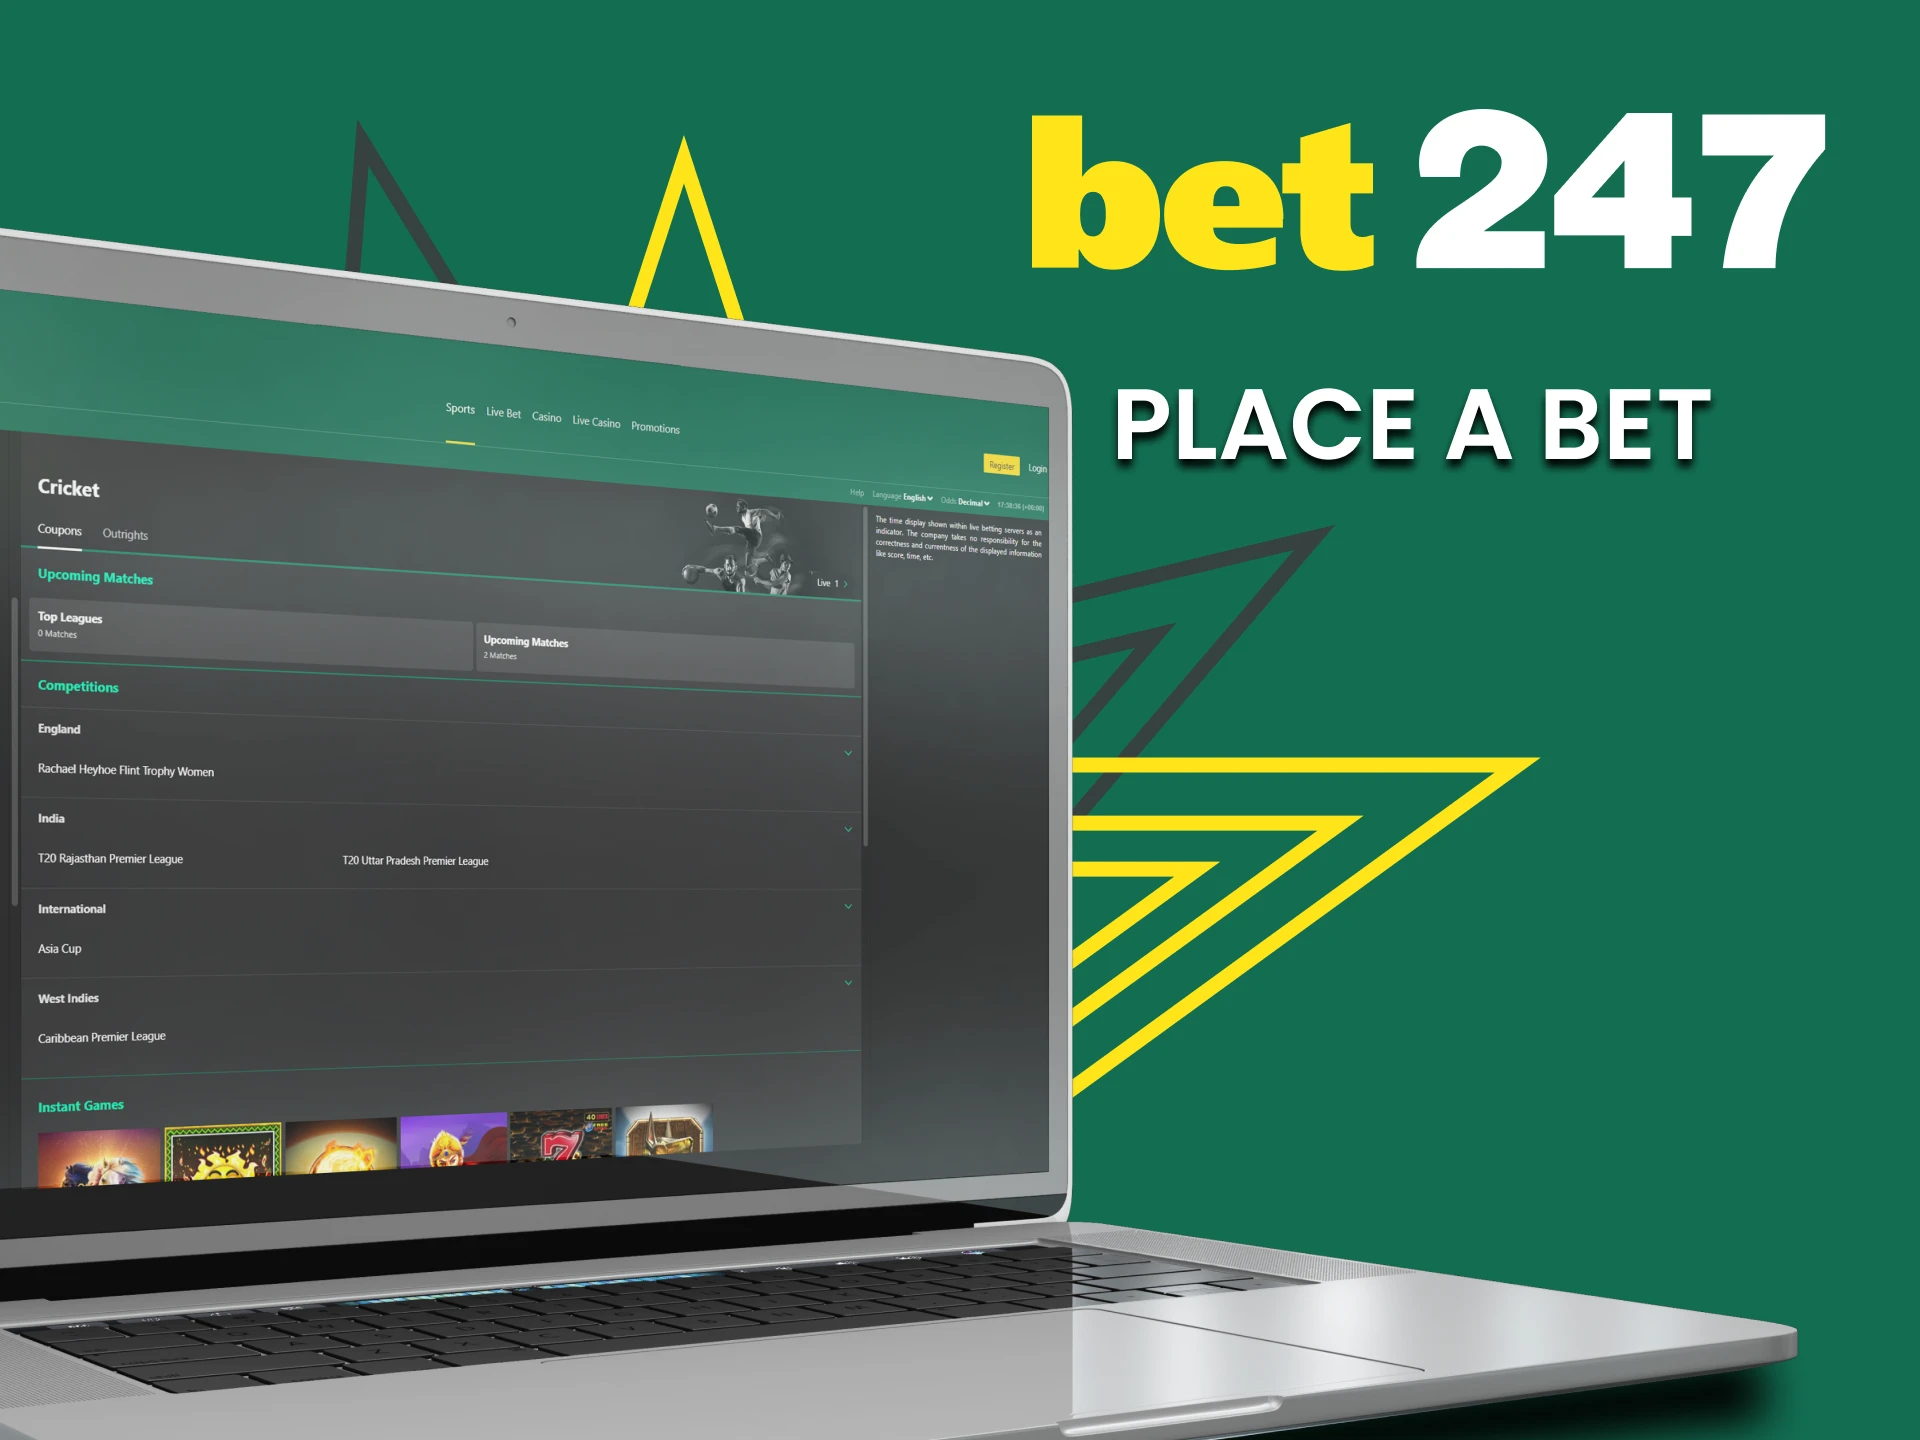 At Bet247 with these instructions, betting is easy.